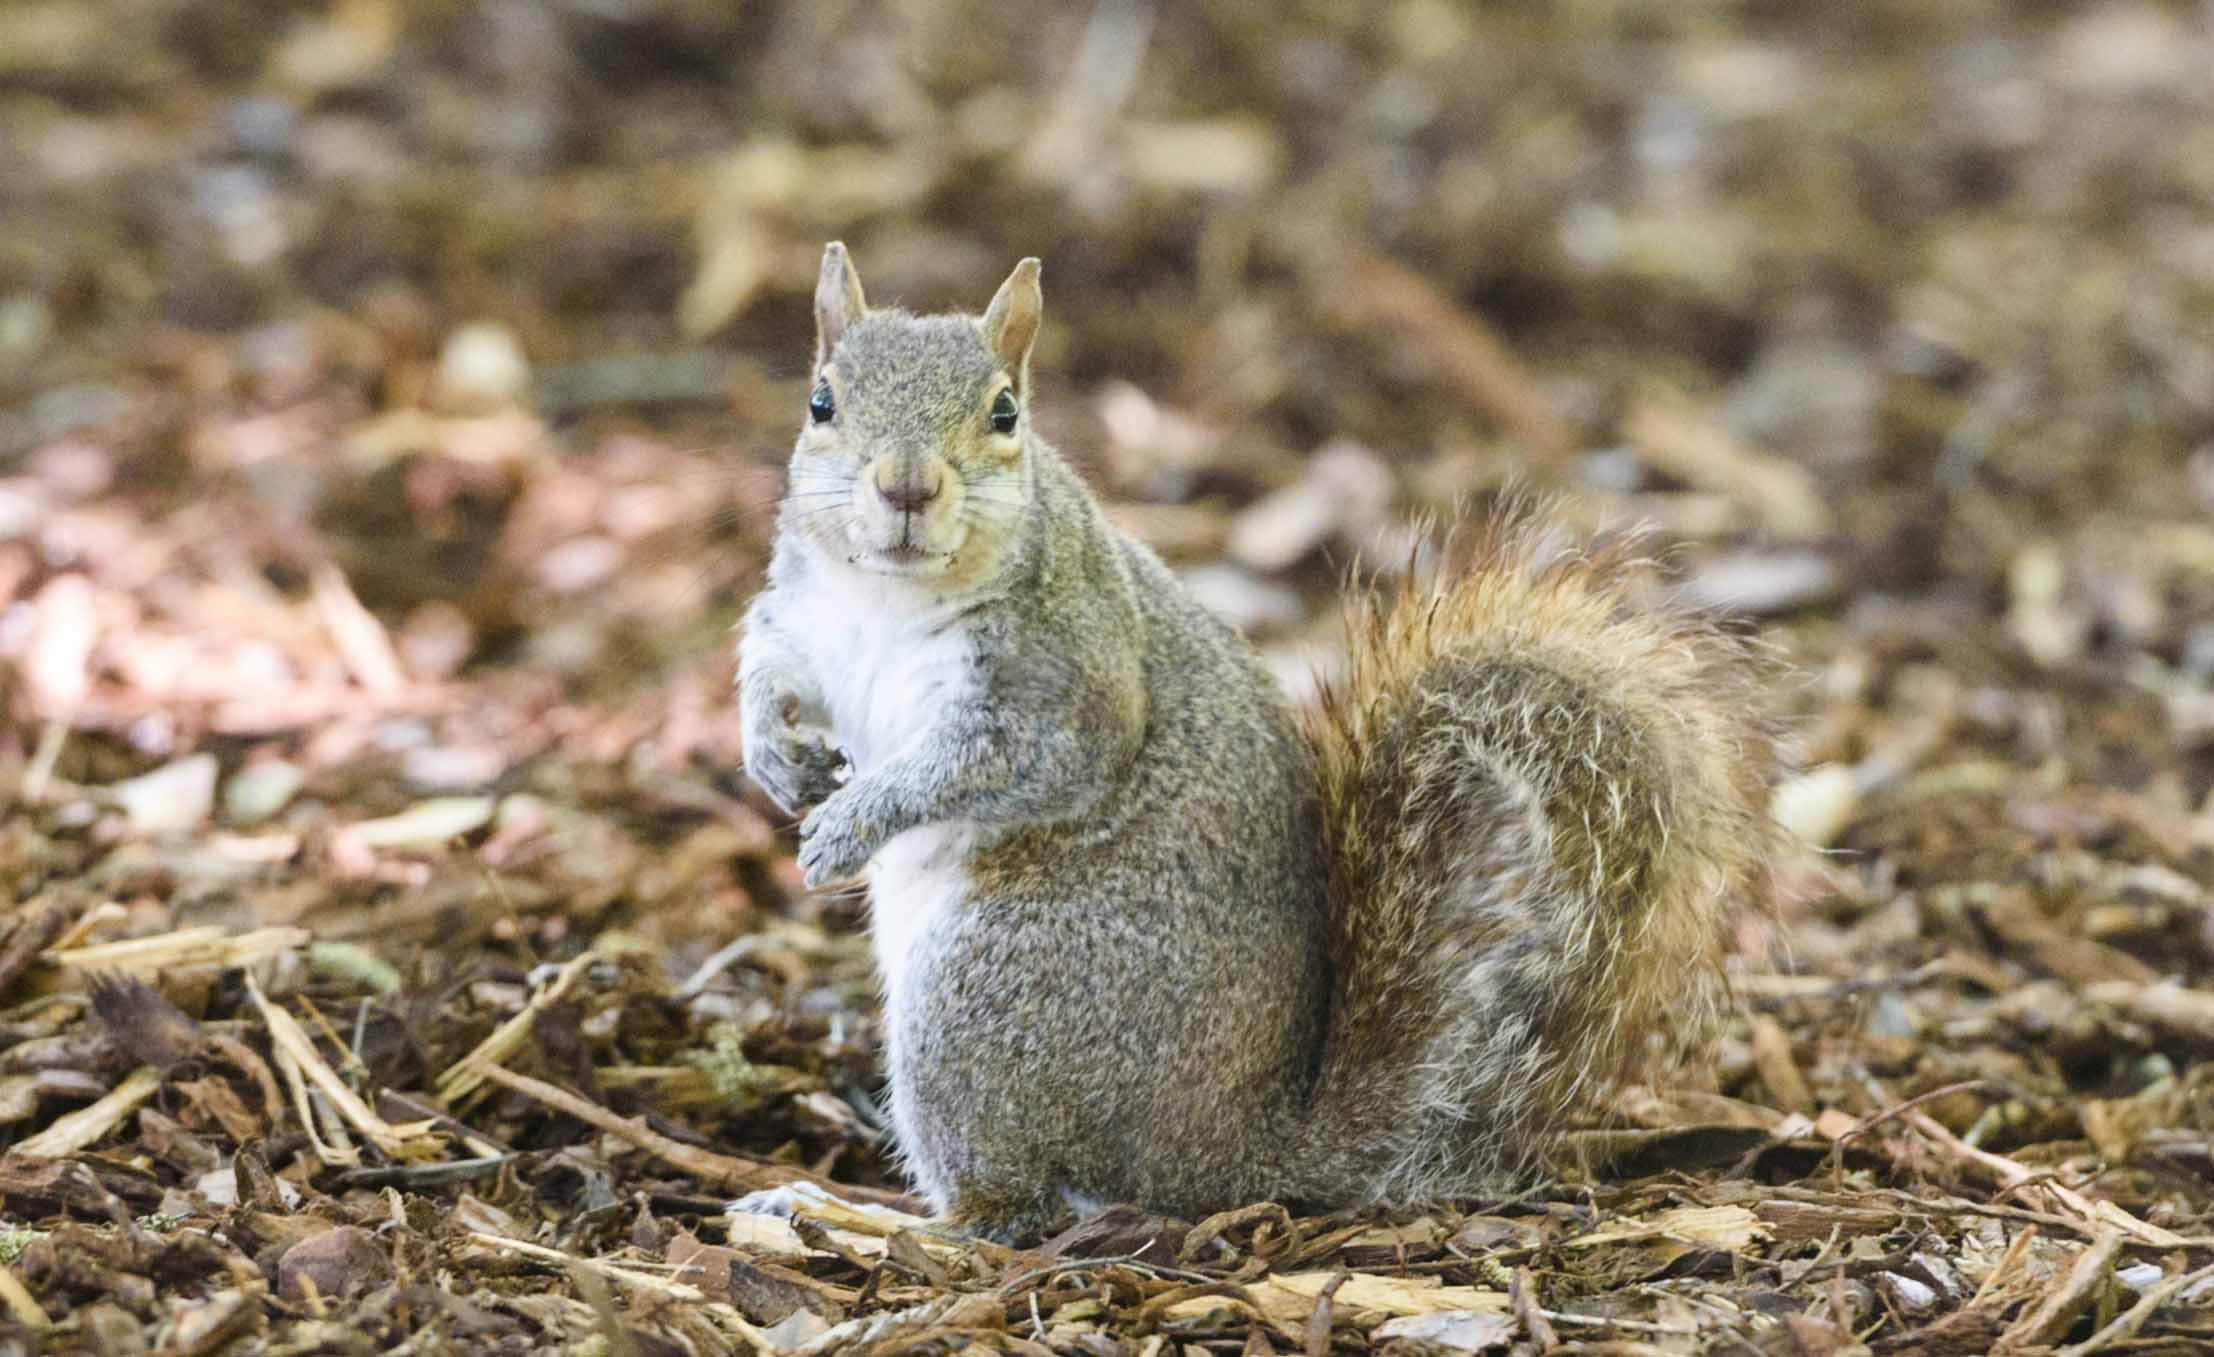 Guide to the Capstone Squirrel – University of Alabama News | The ...